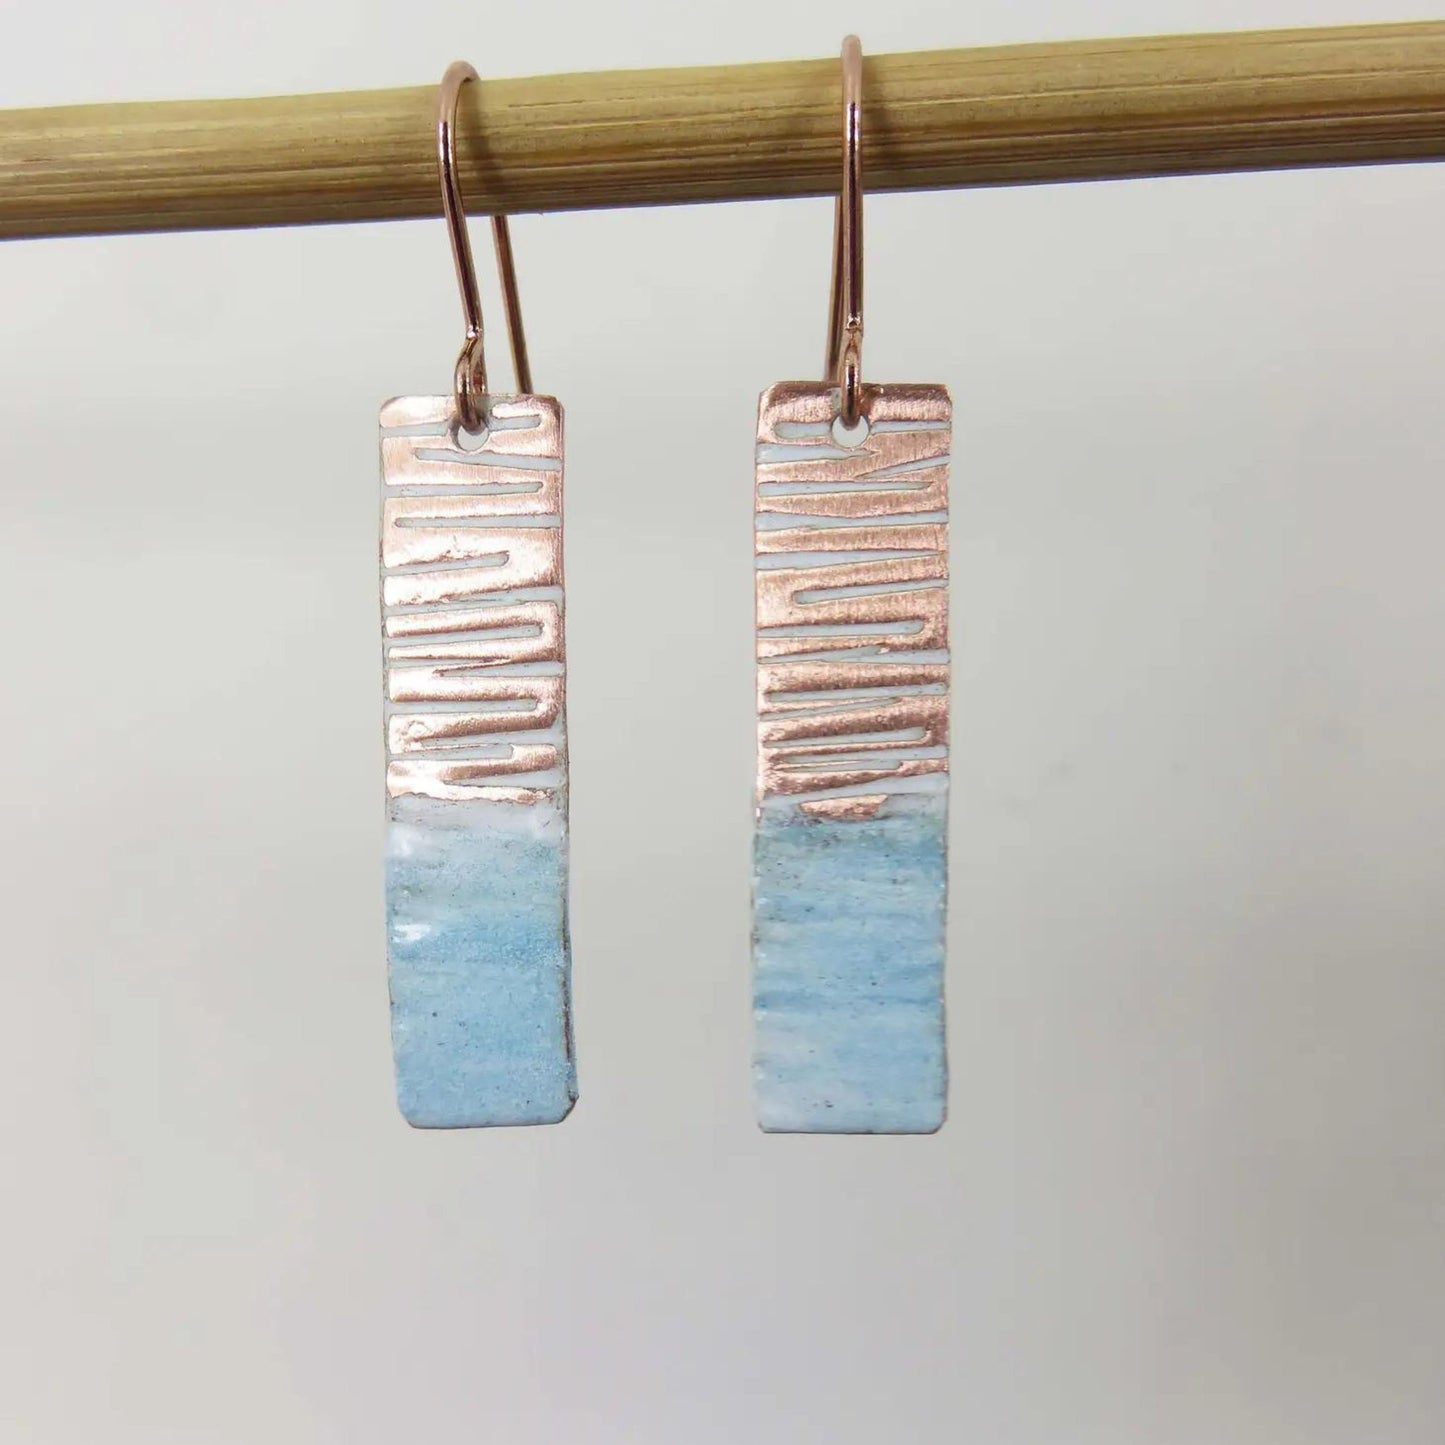 Enamel and Textured Rectangle Copper Dangle Drop Earrings - The Little Jewellery Company